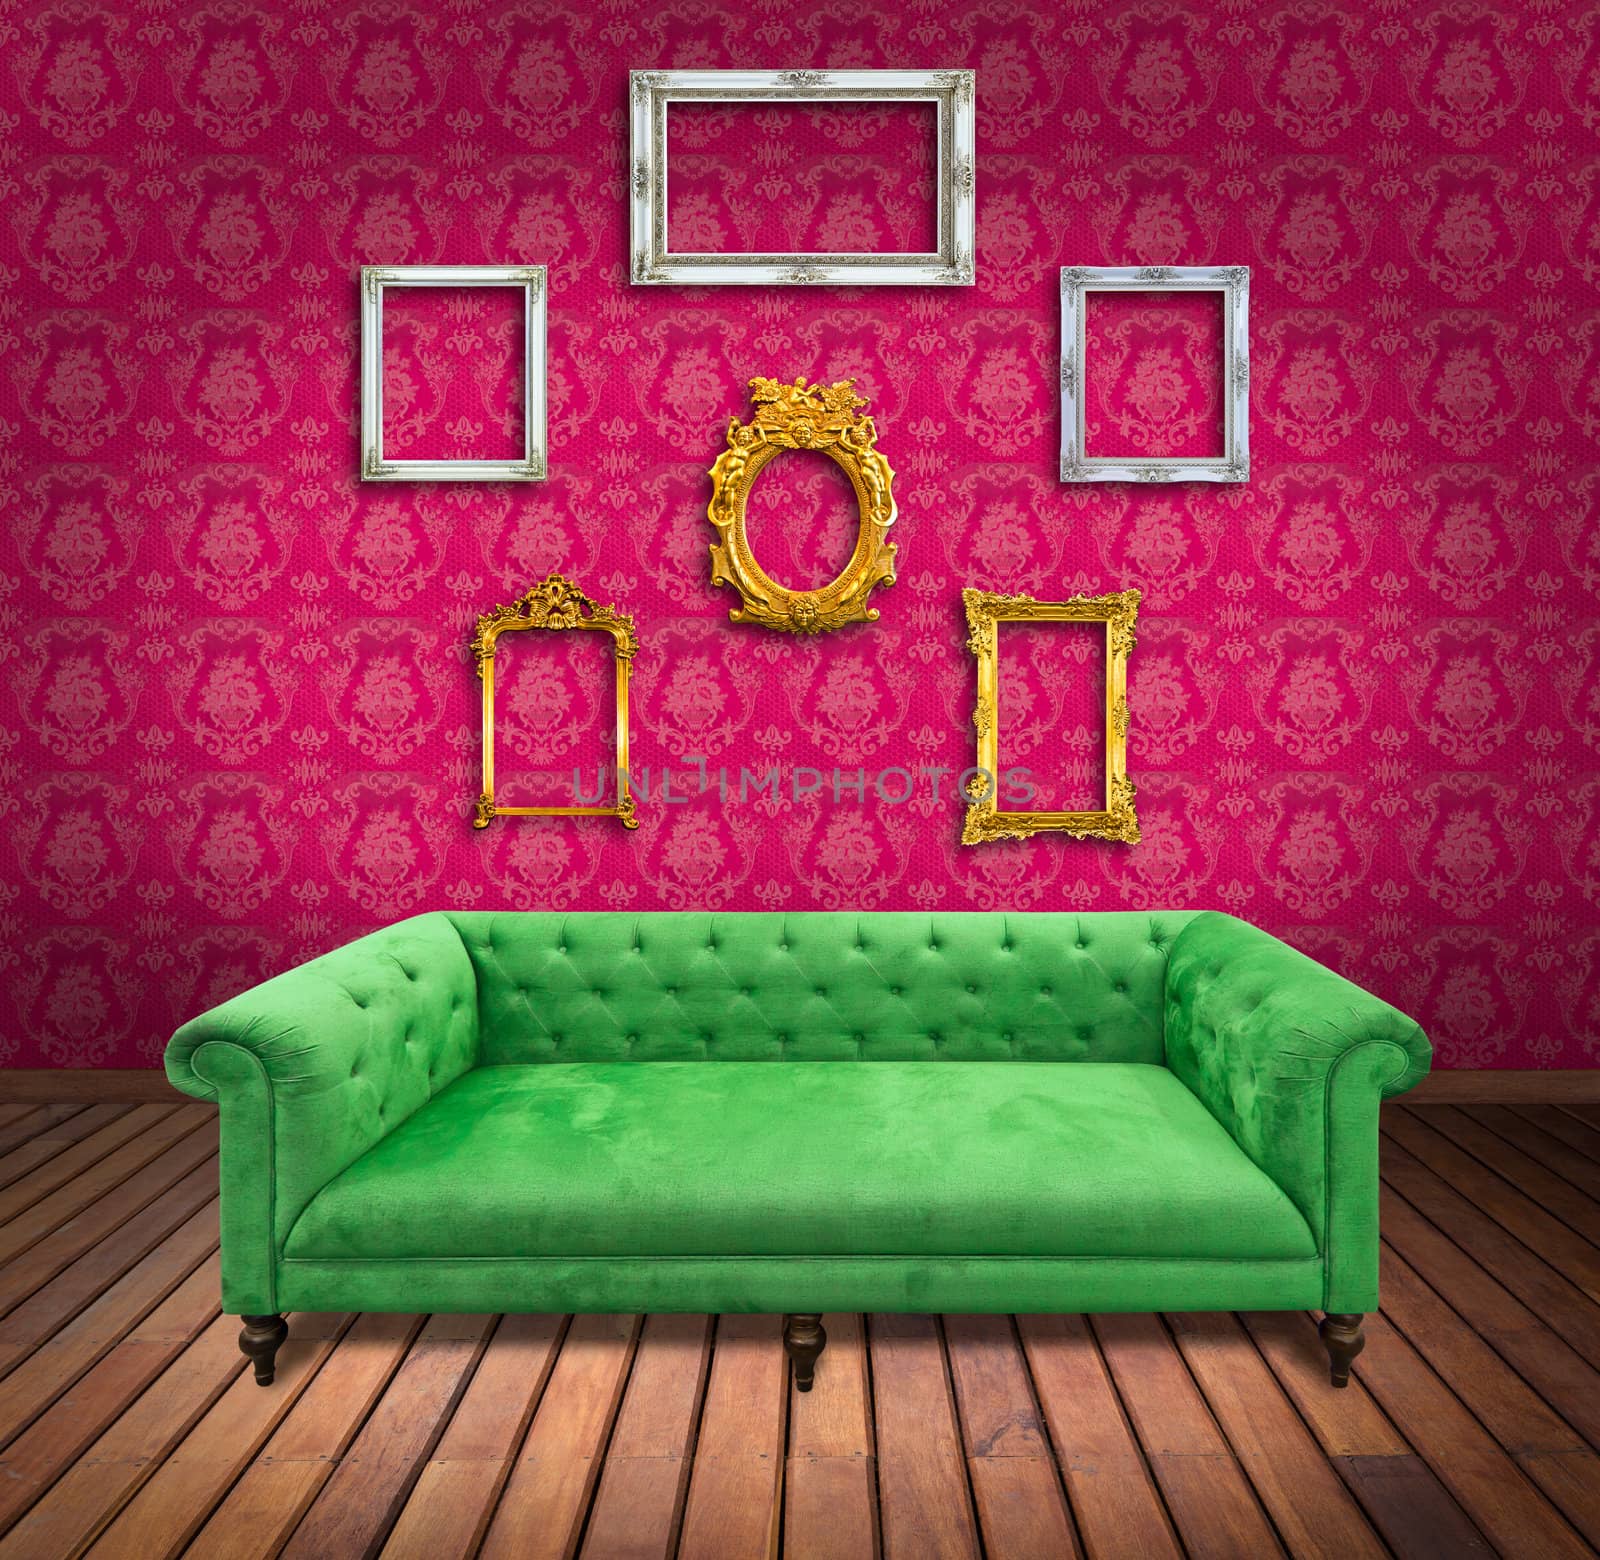 Sofa and frame in pink wallpaper room by tungphoto